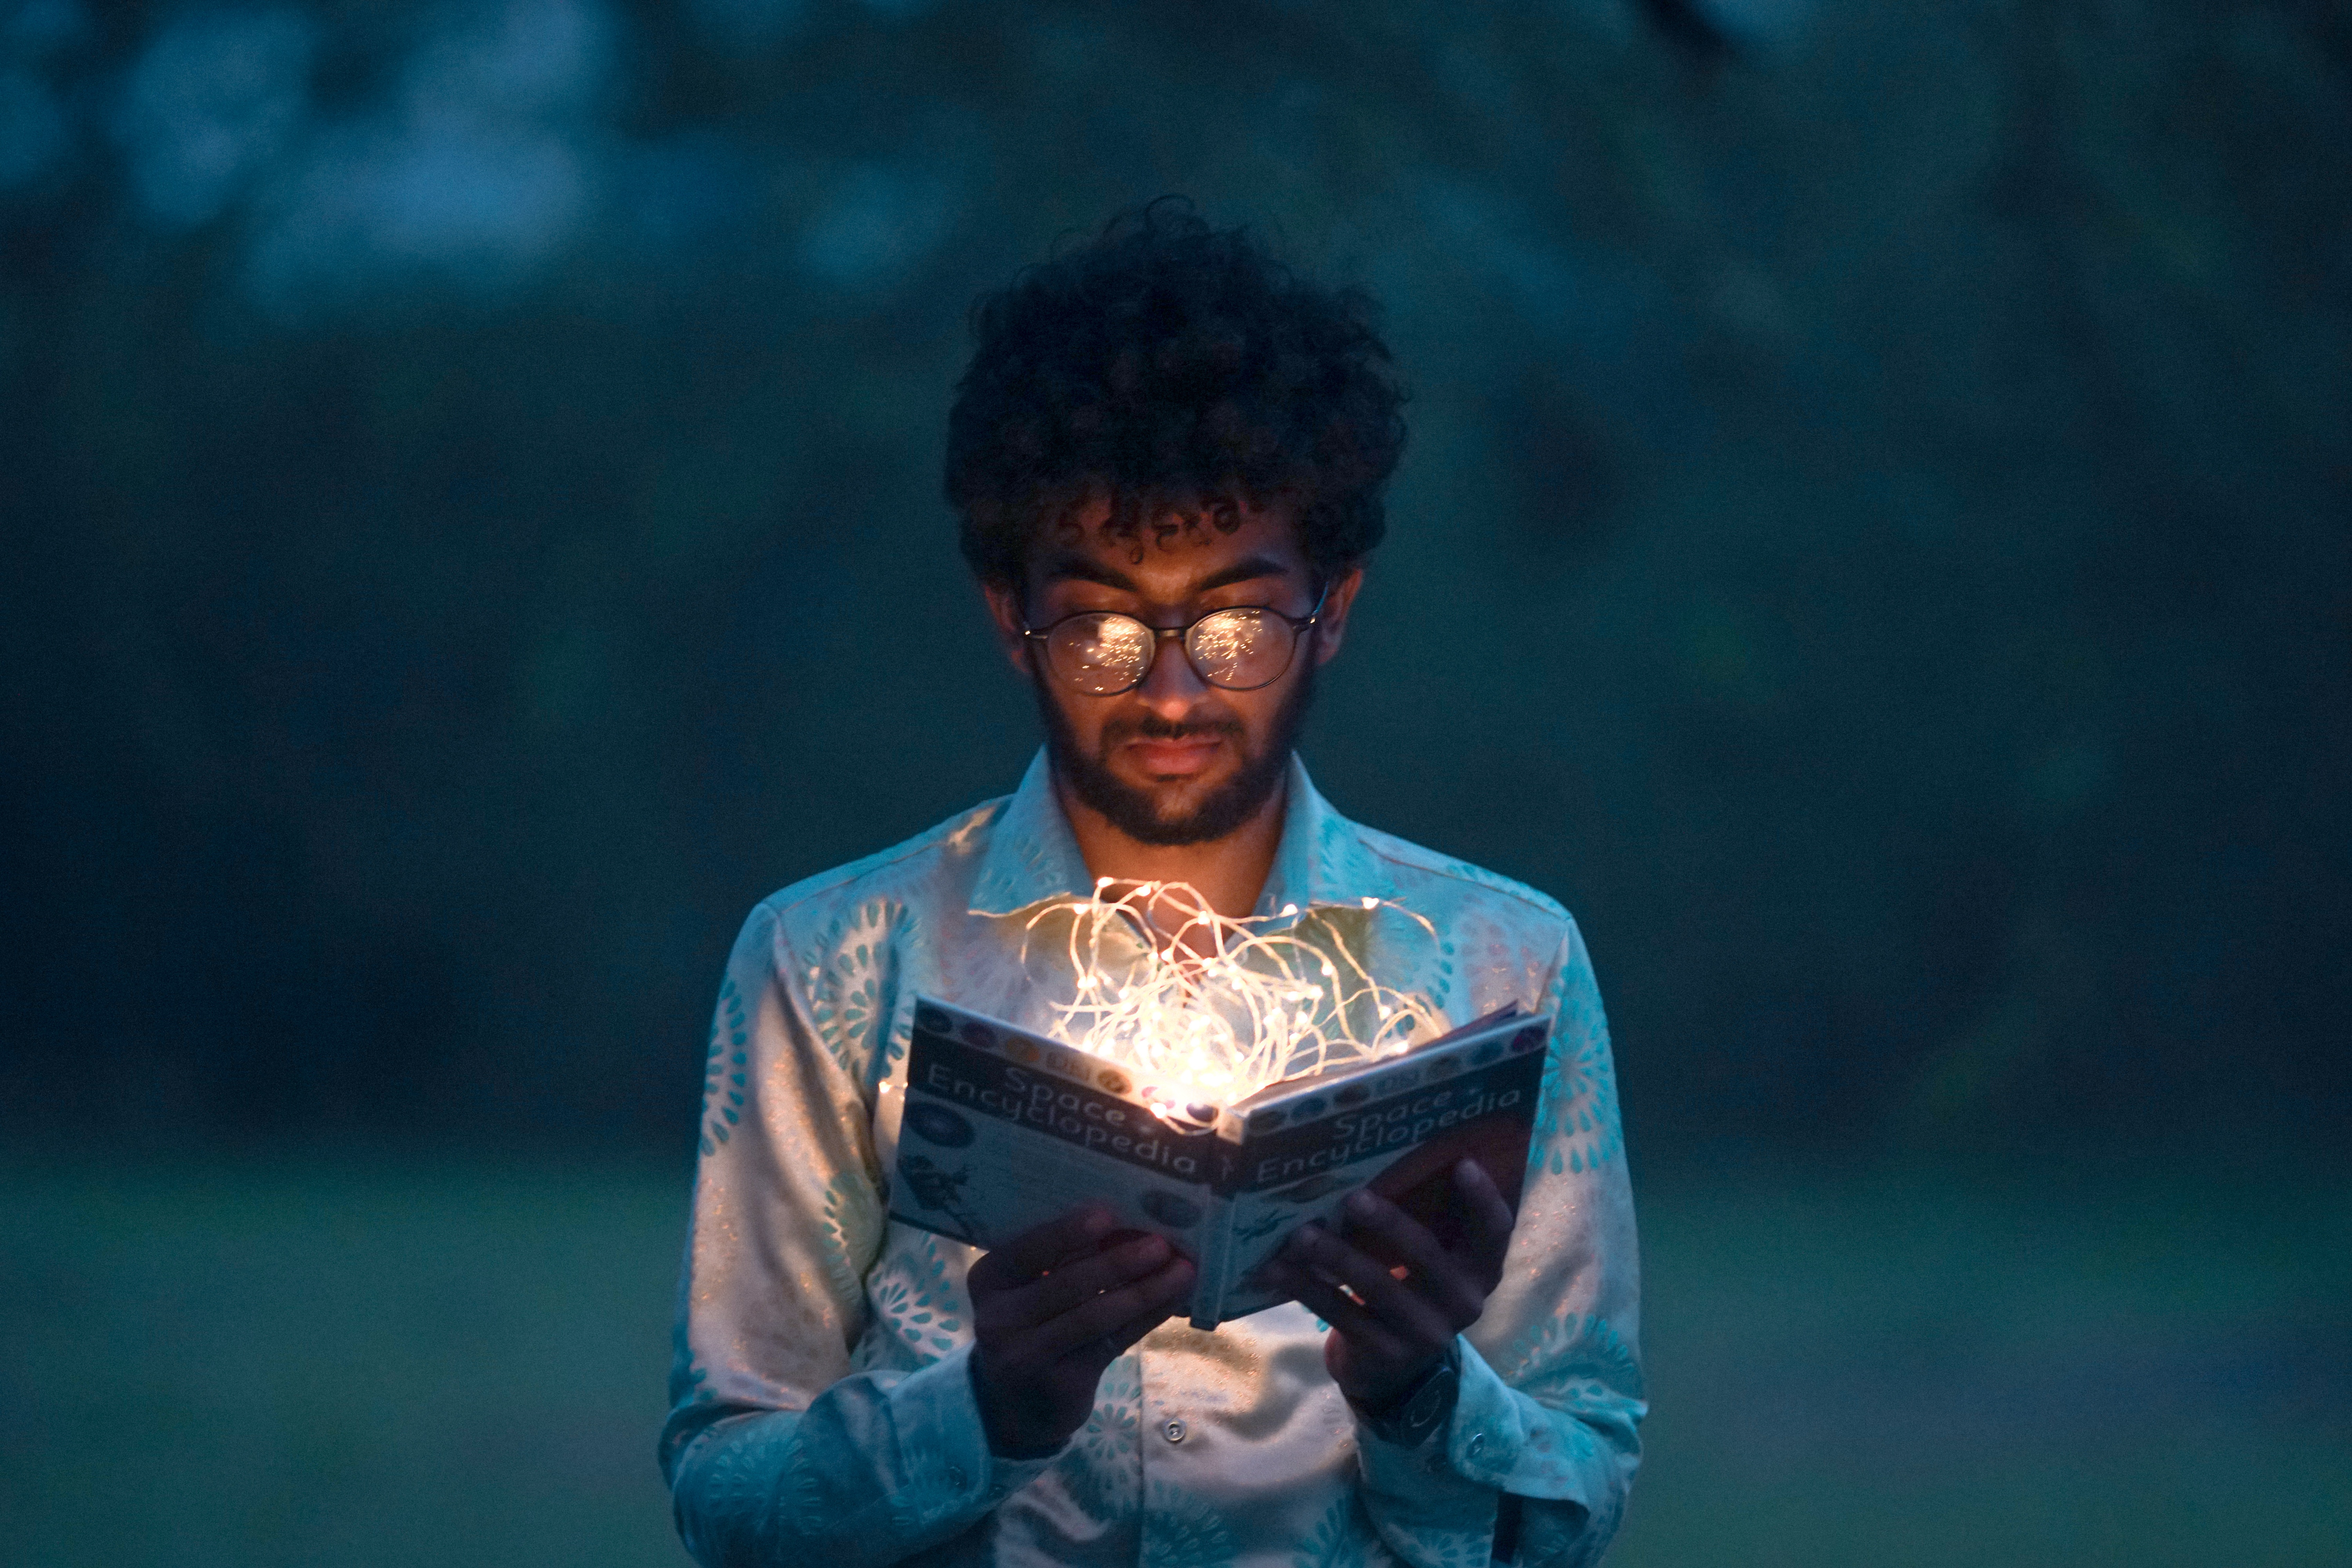 Man opens book which emits light